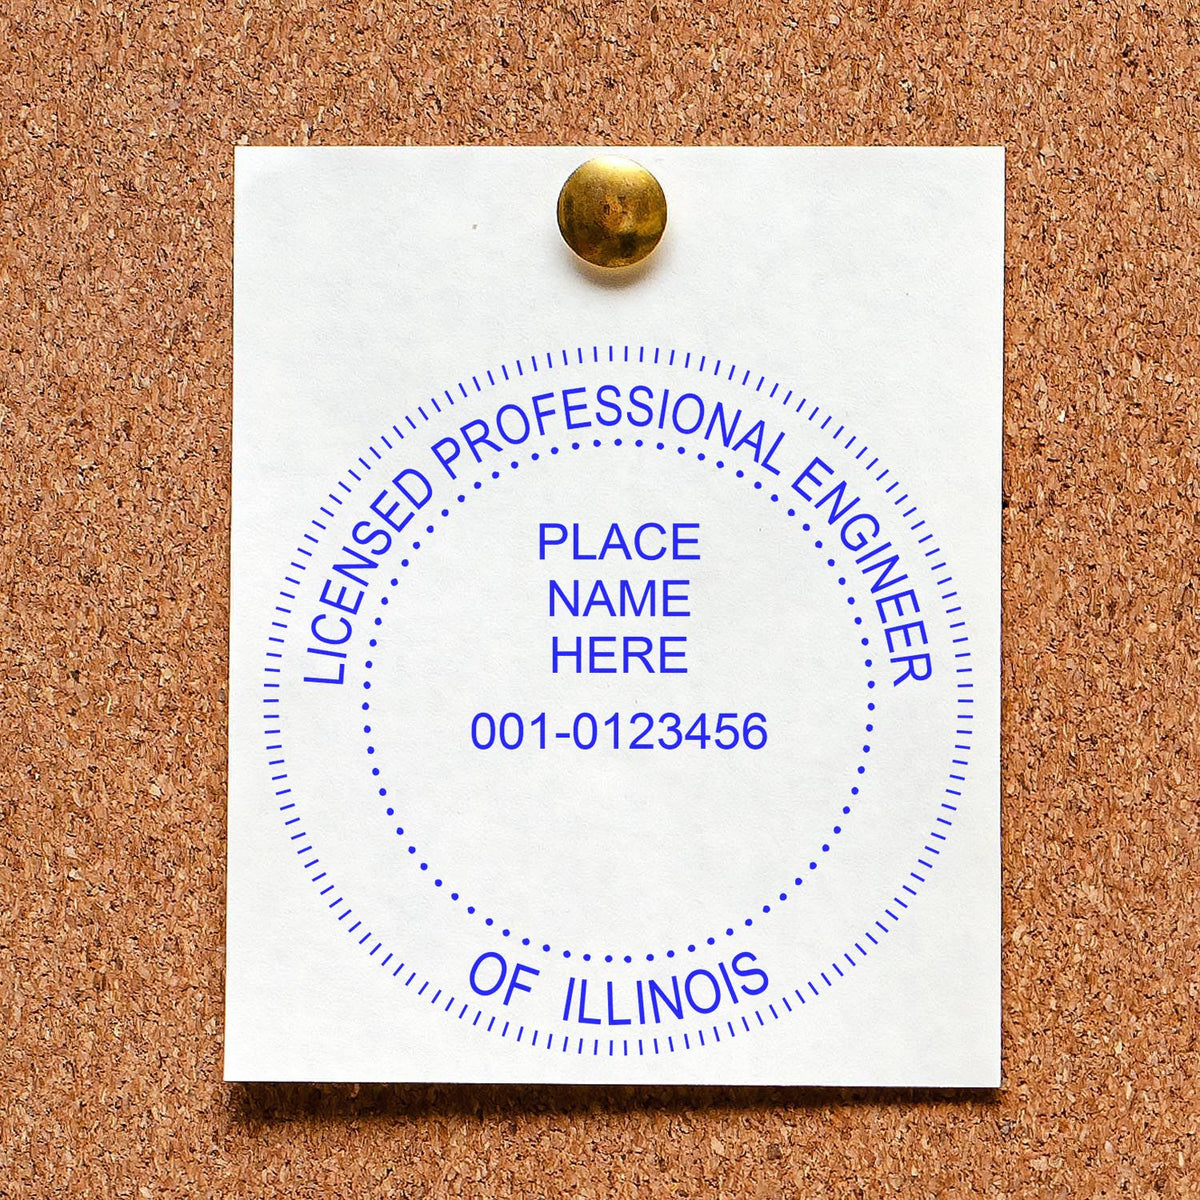 An alternative view of the Illinois Professional Engineer Seal Stamp stamped on a sheet of paper showing the image in use